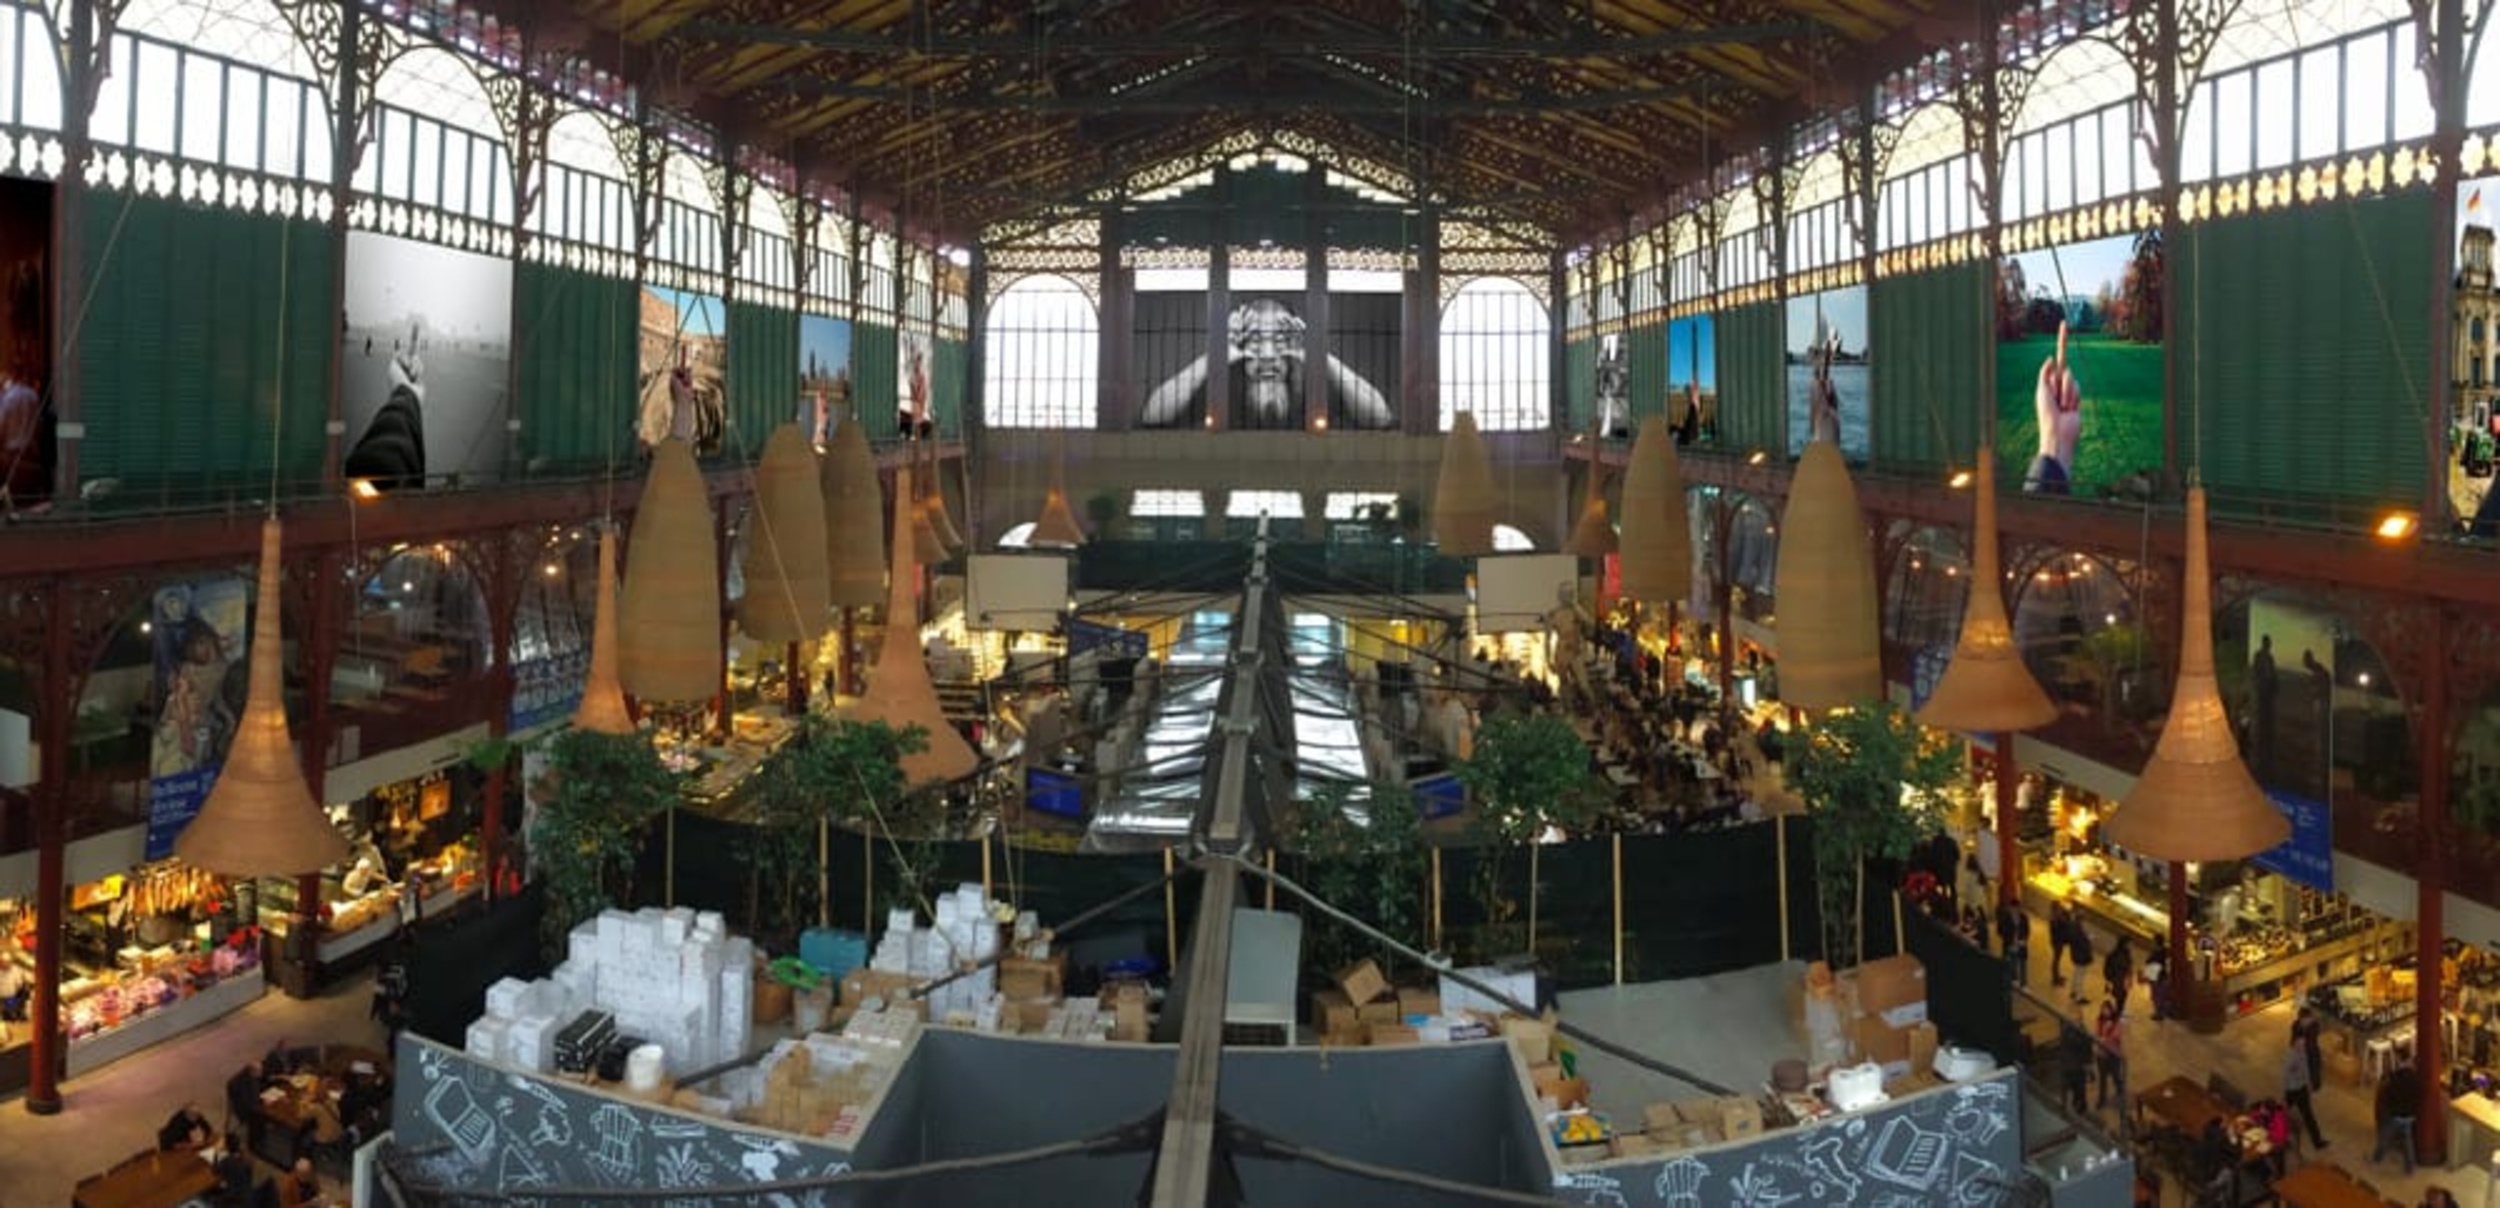 <p>Dodge the wait time at restaurants and instead head inside this 19th-century market. Home to some of the freshest fruit, wine and veggies in Florence, Centrale's second floor is packed with vendors serving up dishes you can't find anywhere else.</p><p><a href='https://www.msn.com/en-us/community/channel/vid-cj9pqbr0vn9in2b6ddcd8sfgpfq6x6utp44fssrv6mc2gtybw0us'>Follow us on MSN to see more of our exclusive lifestyle content.</a></p>